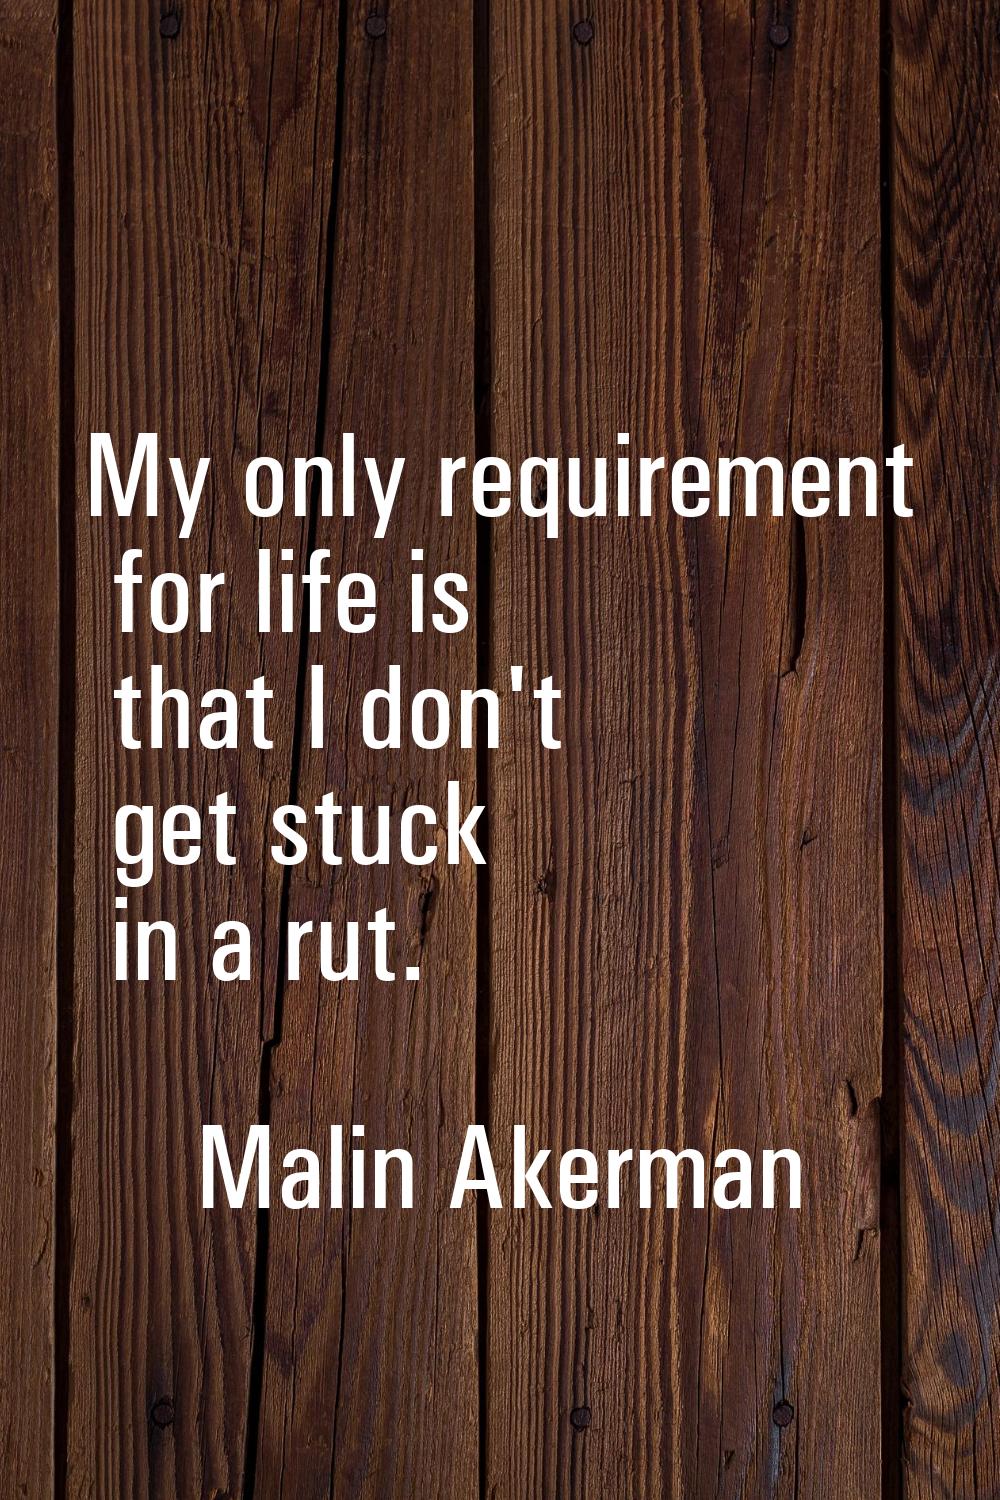 My only requirement for life is that I don't get stuck in a rut.